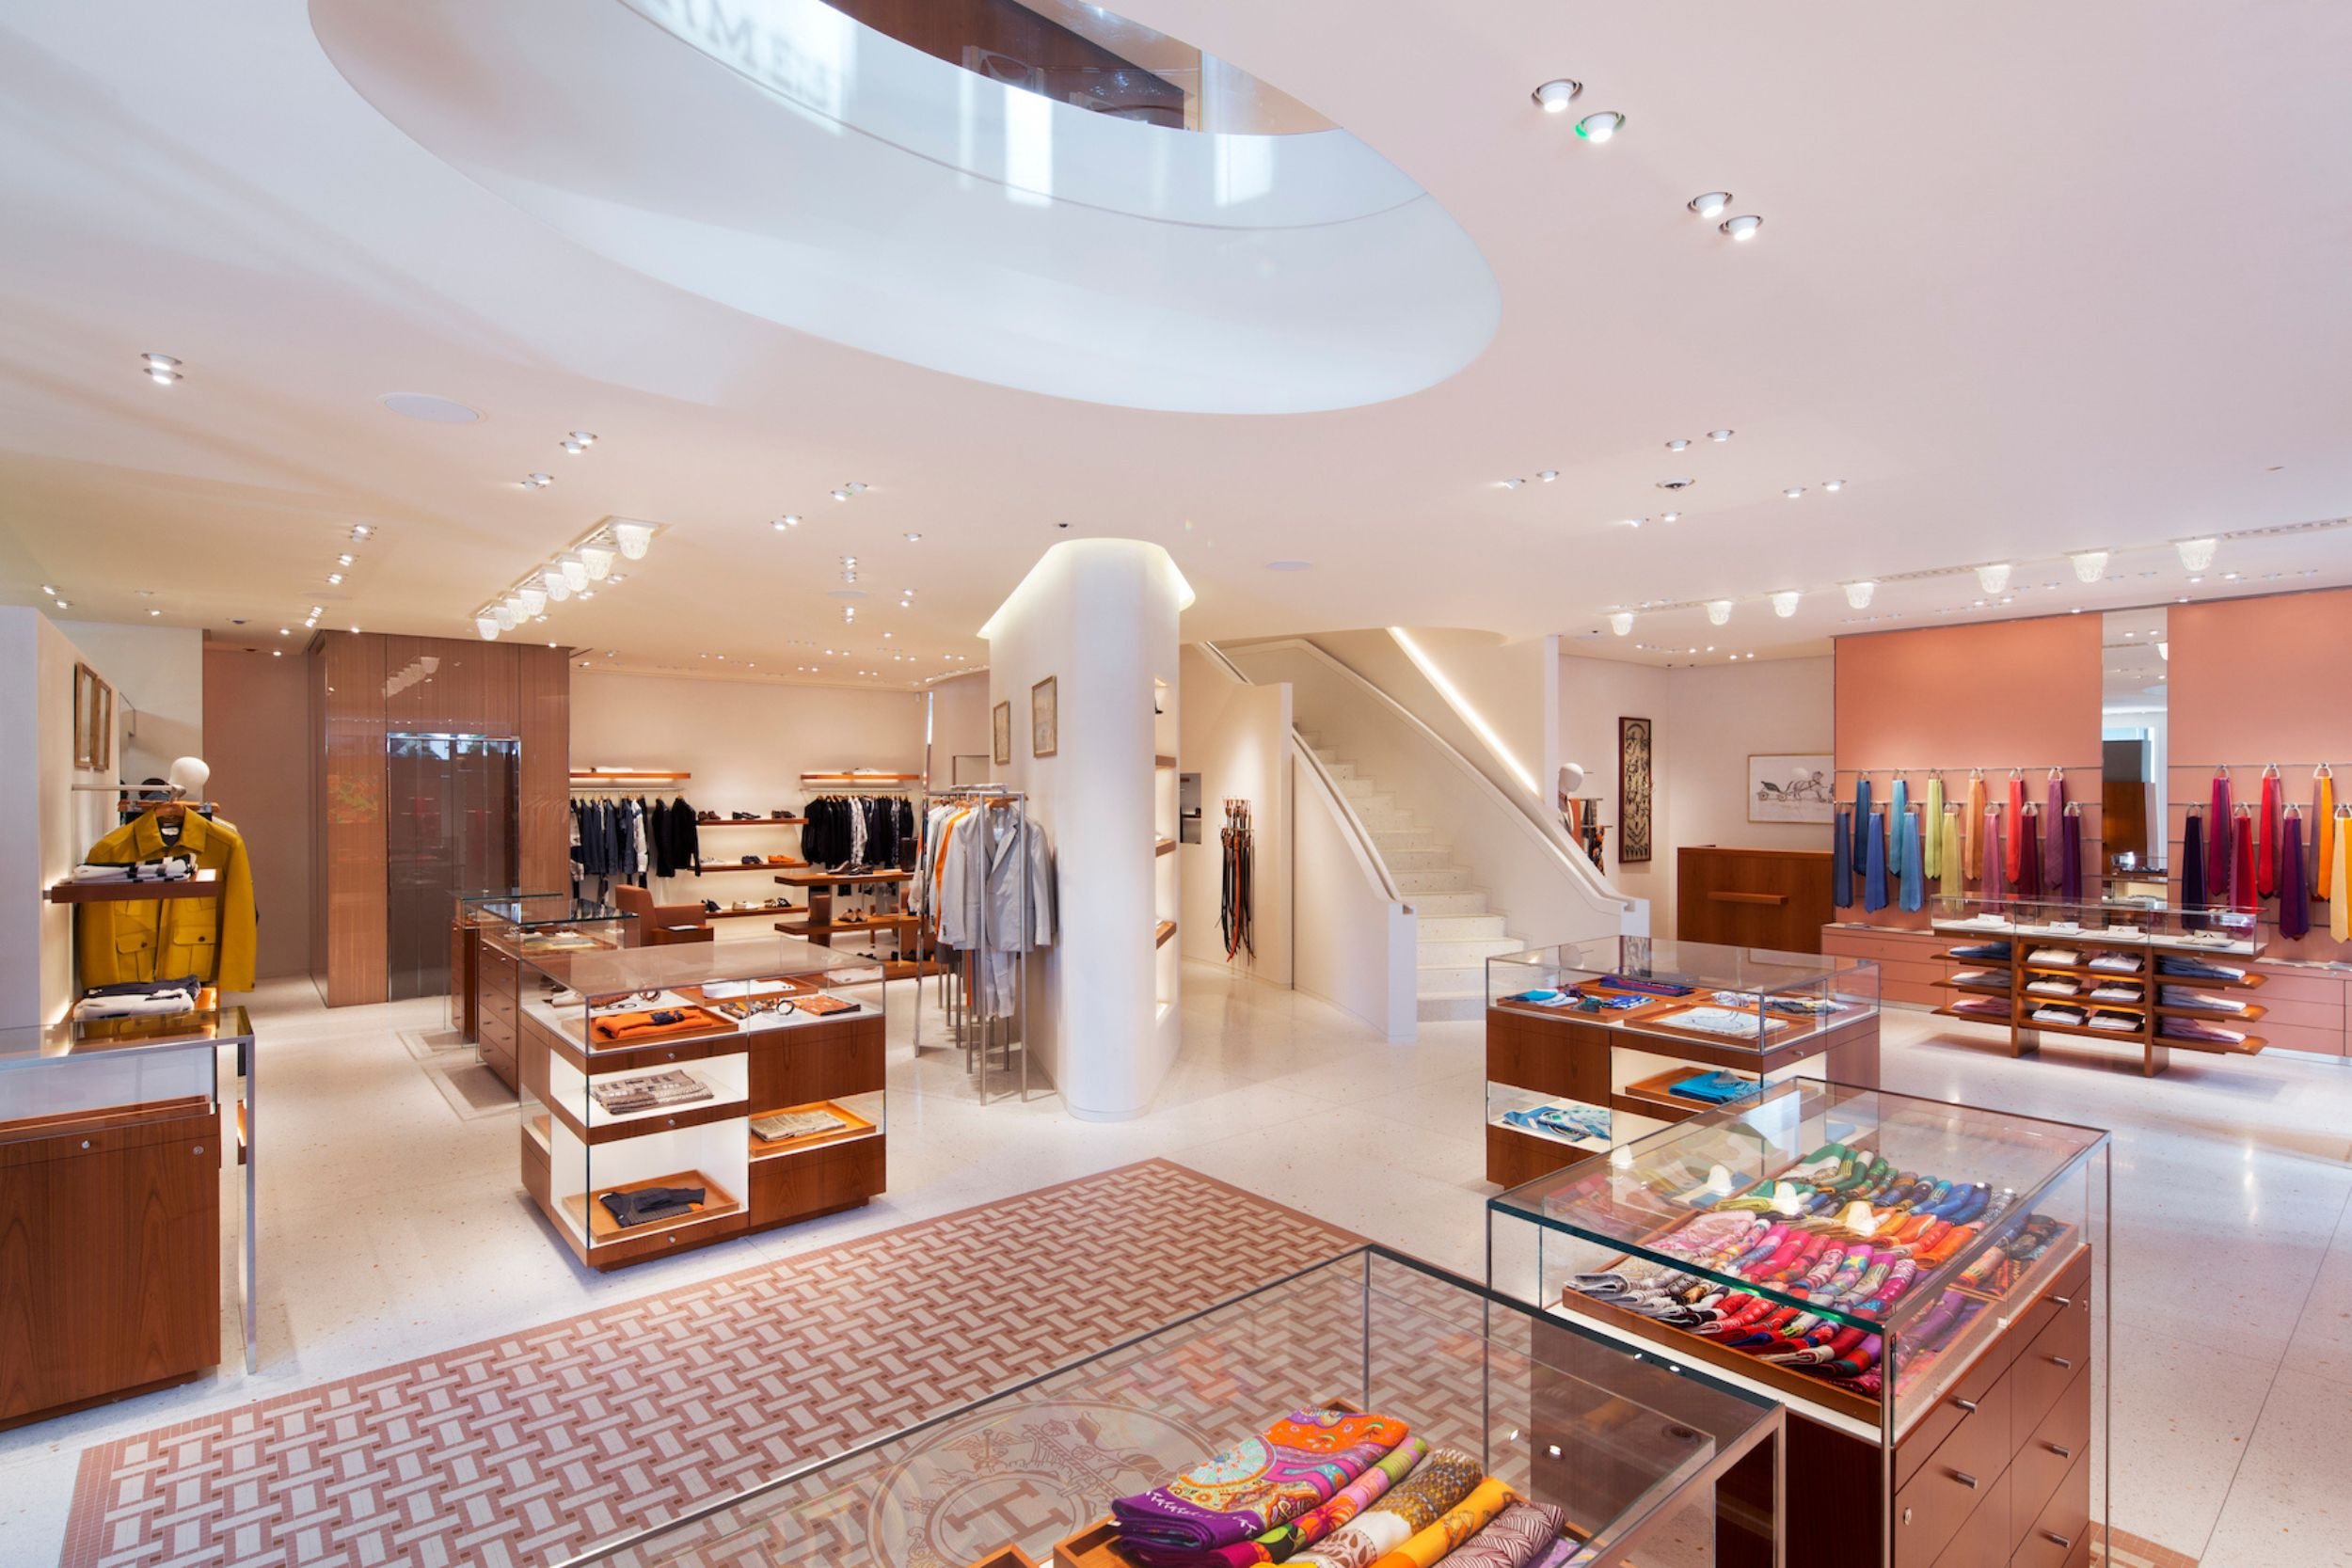 An up-market retail space with a bright AV lighting system.